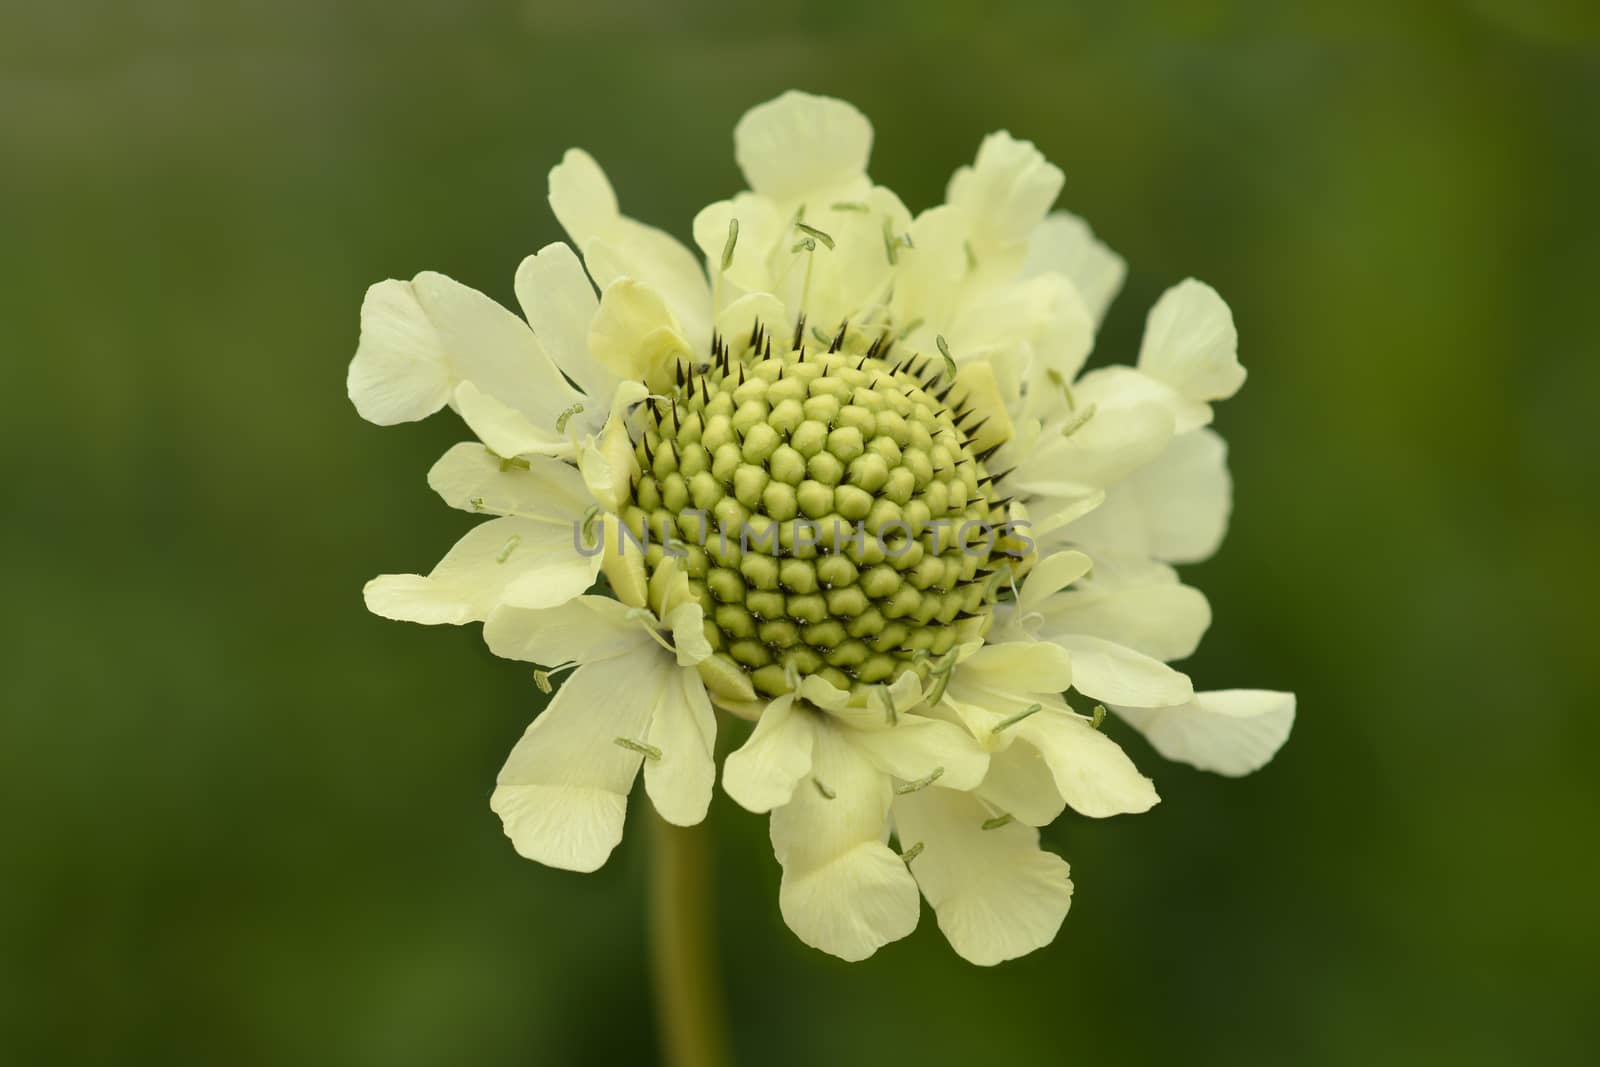 Giant scabious by nahhan